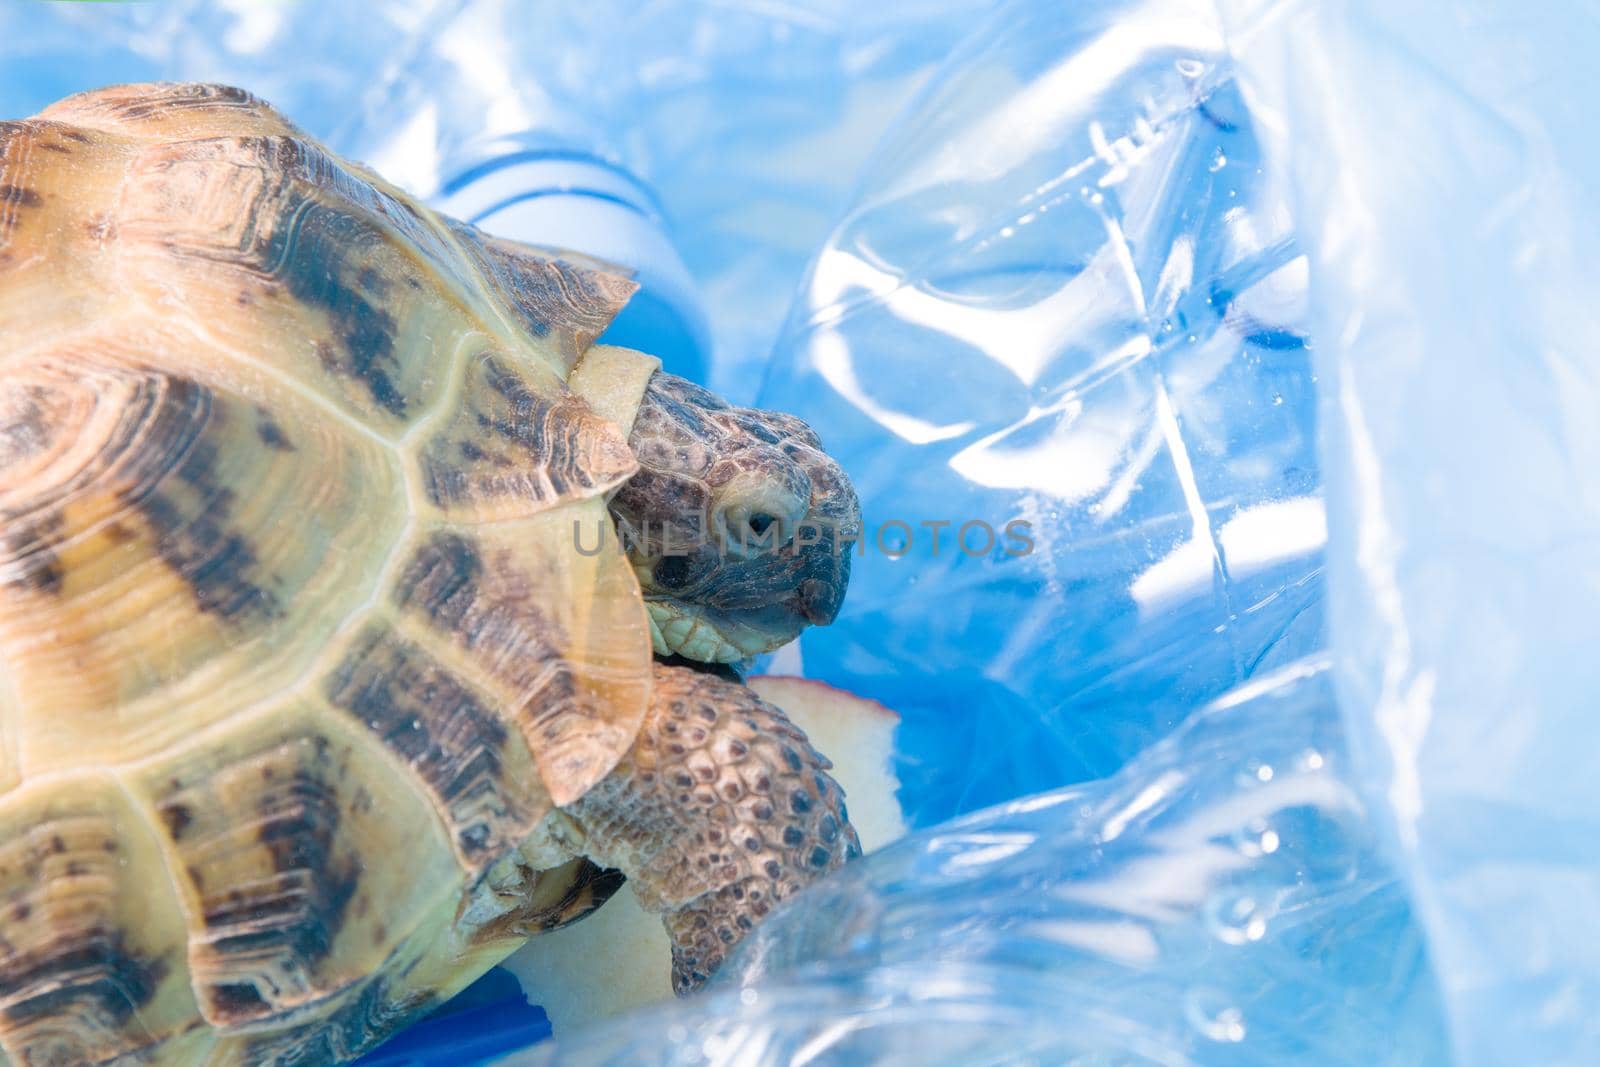 land Central Asian tortoise in a pile of plastic waste, environmental pollution concept, harmful plastic for animals, zero waste and an eco friendly lifestyle